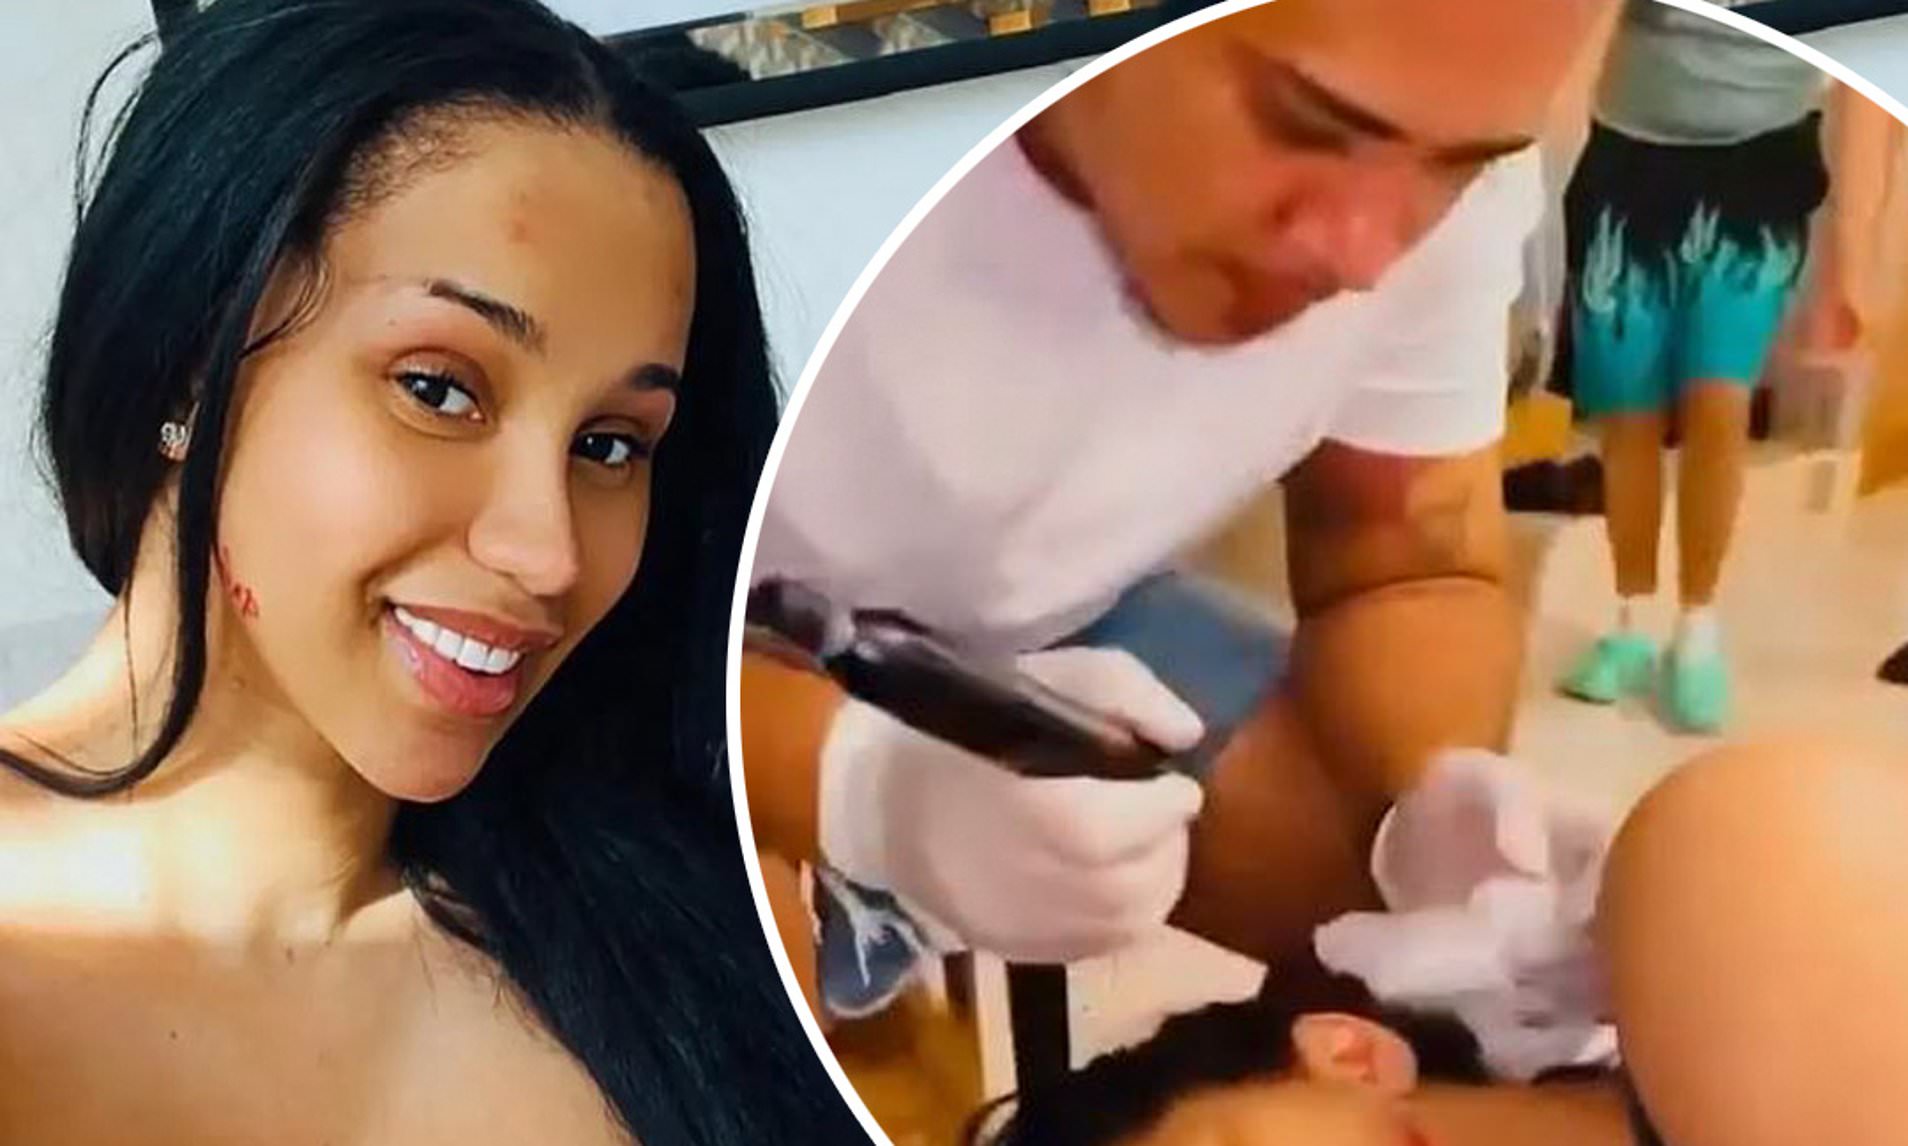 Cardi B insists she has no regrets about shock new tattoo on her